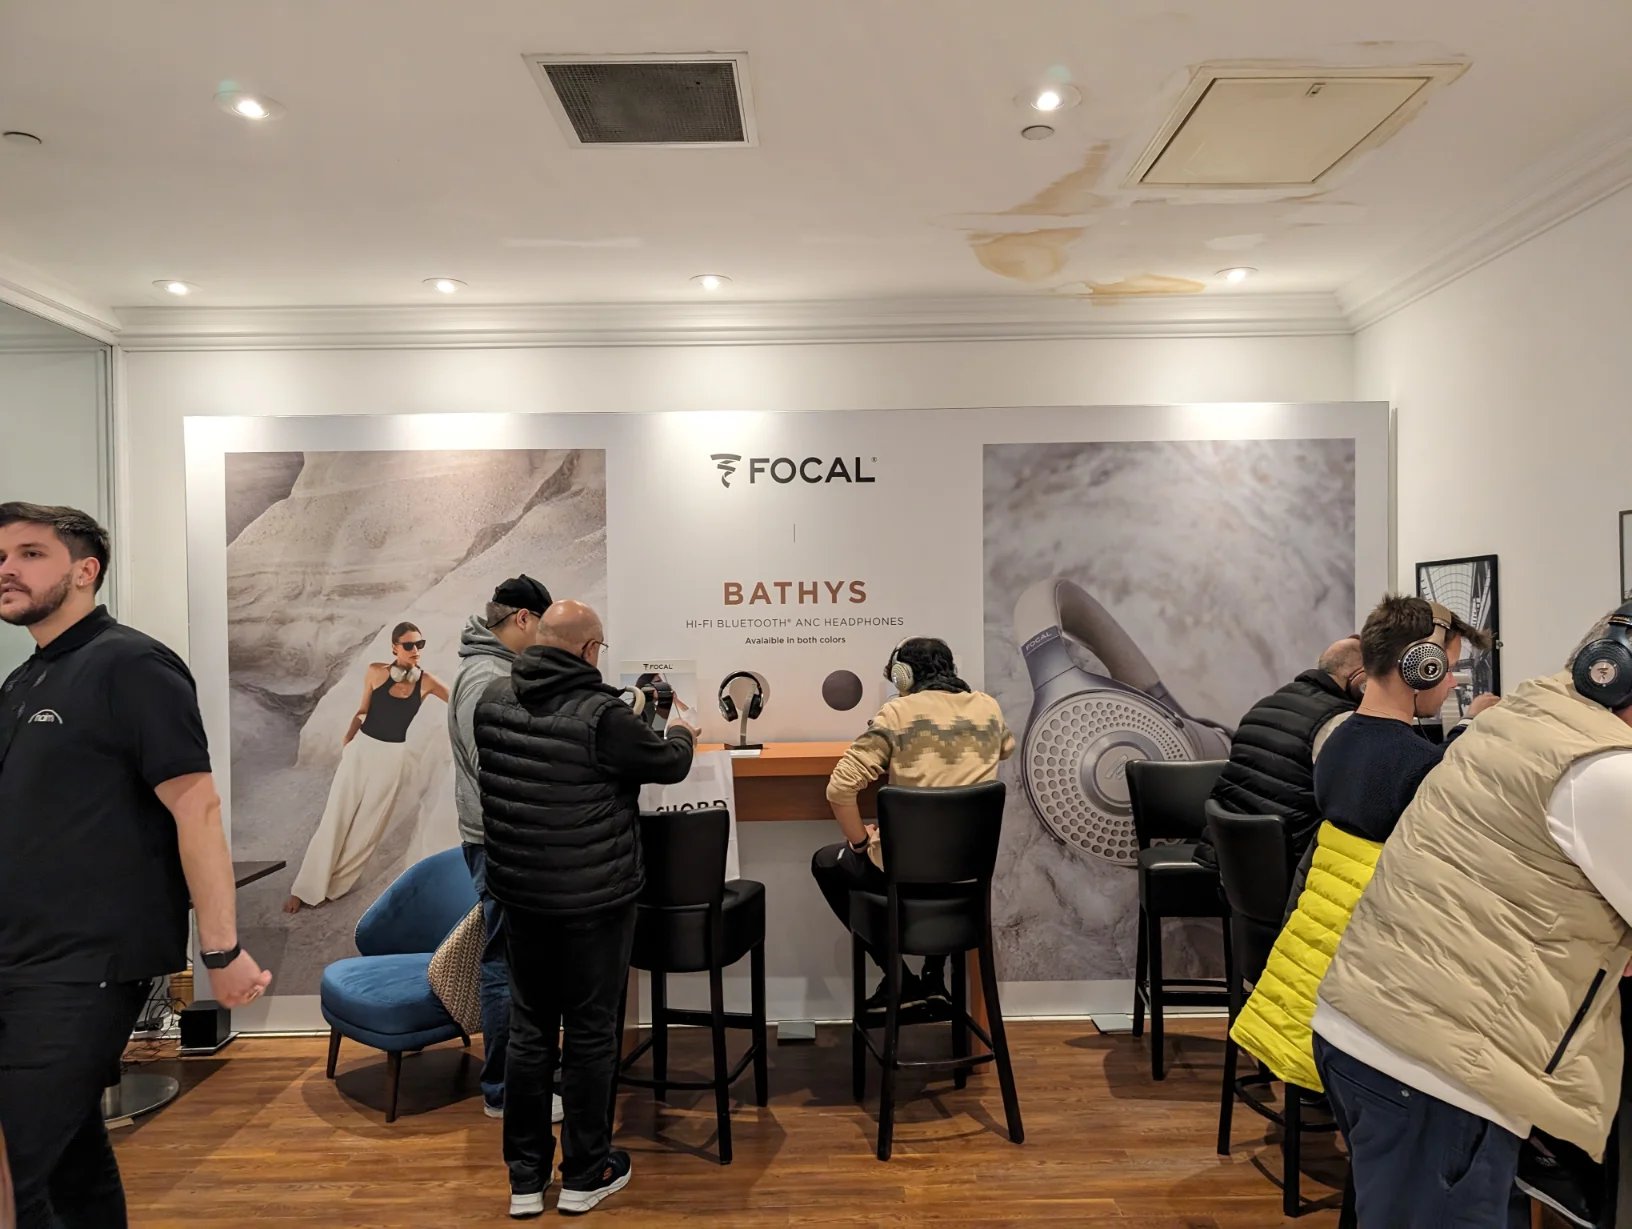 Focal had a great headphone display, I don’t think there was a seat free at any point.